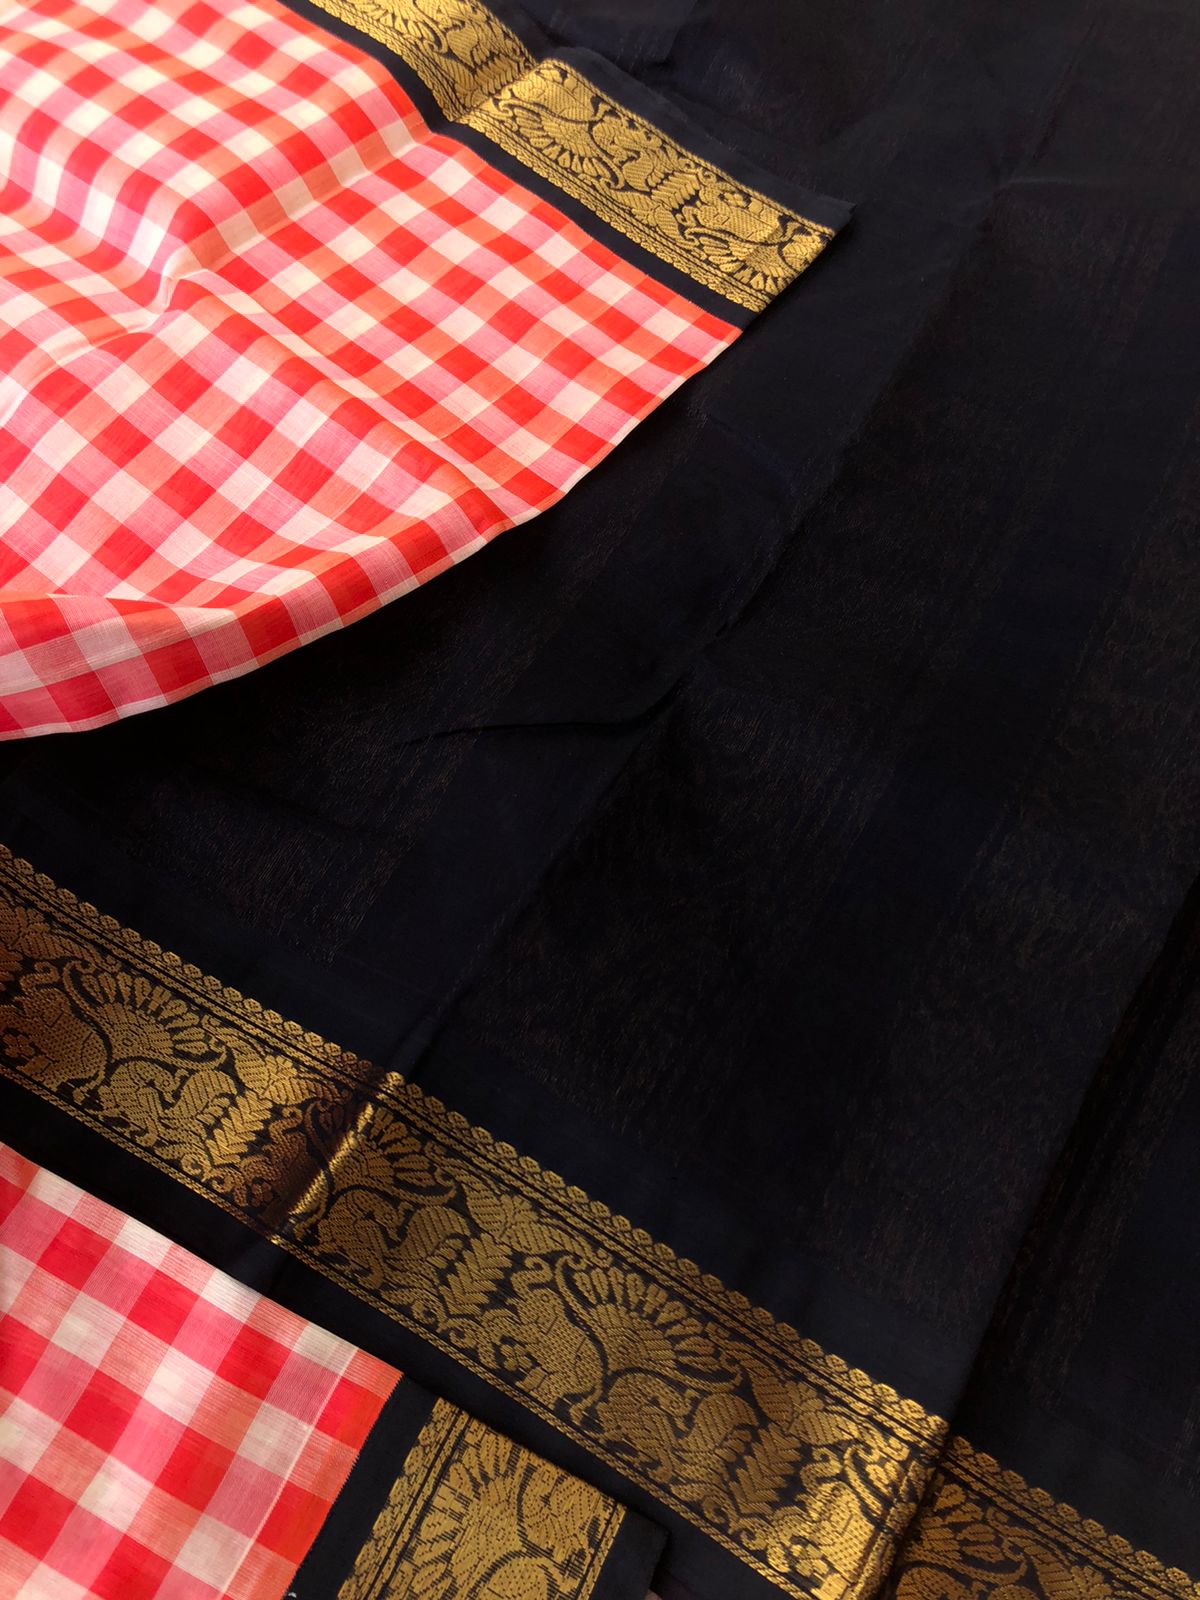 Paalum palamum kattam on Korvai Silk Cotton - off and red chex with black borders and pallu